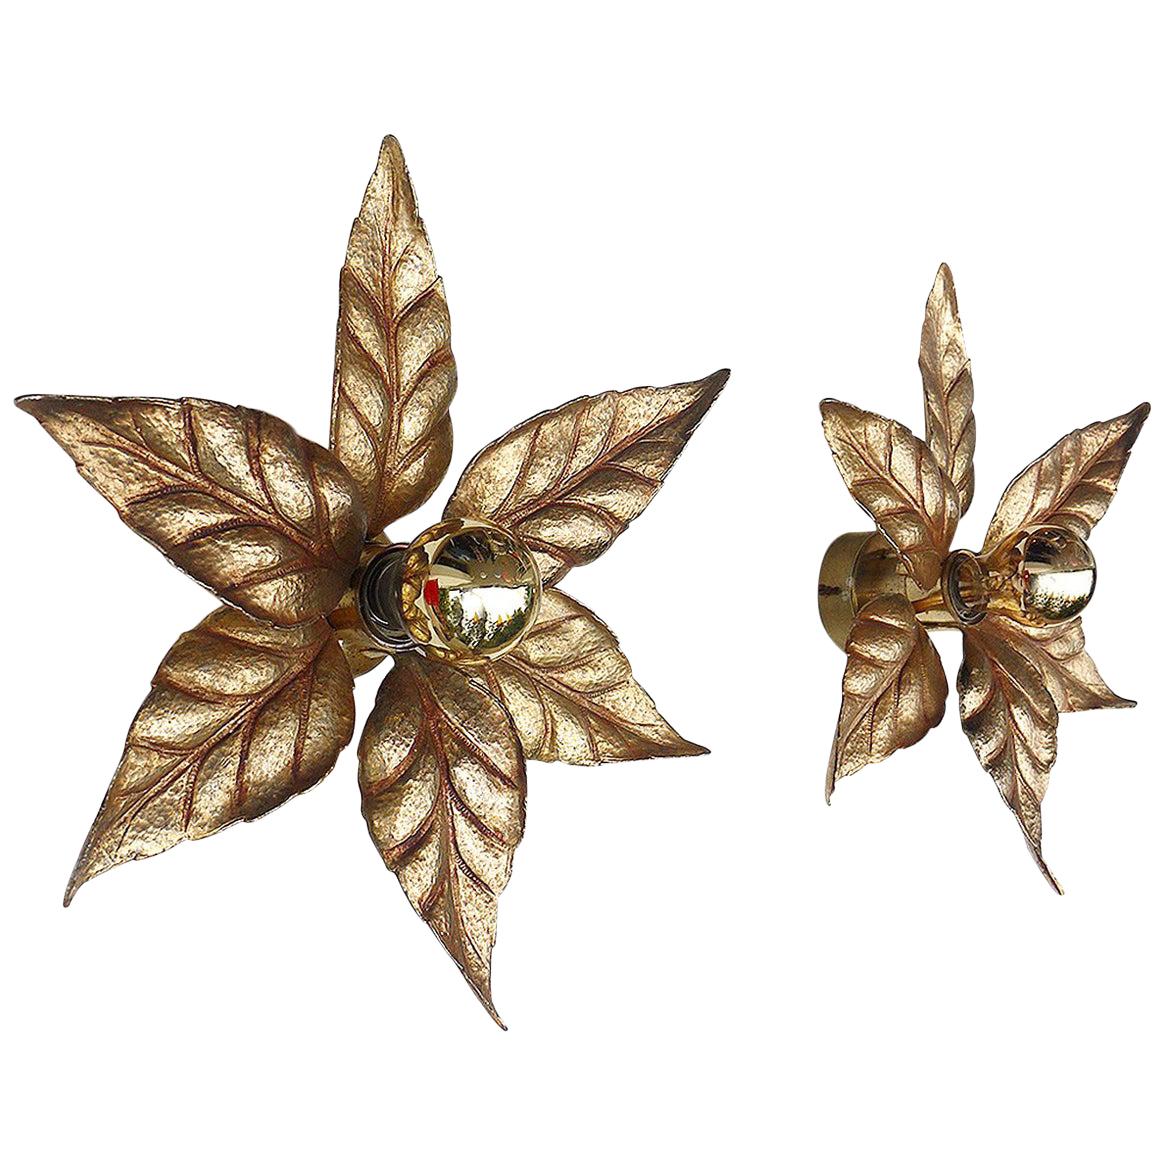 1 (of 2) Pair of 1970 Belgium Willy Daro Massive Wall Sconce Brass Leaves